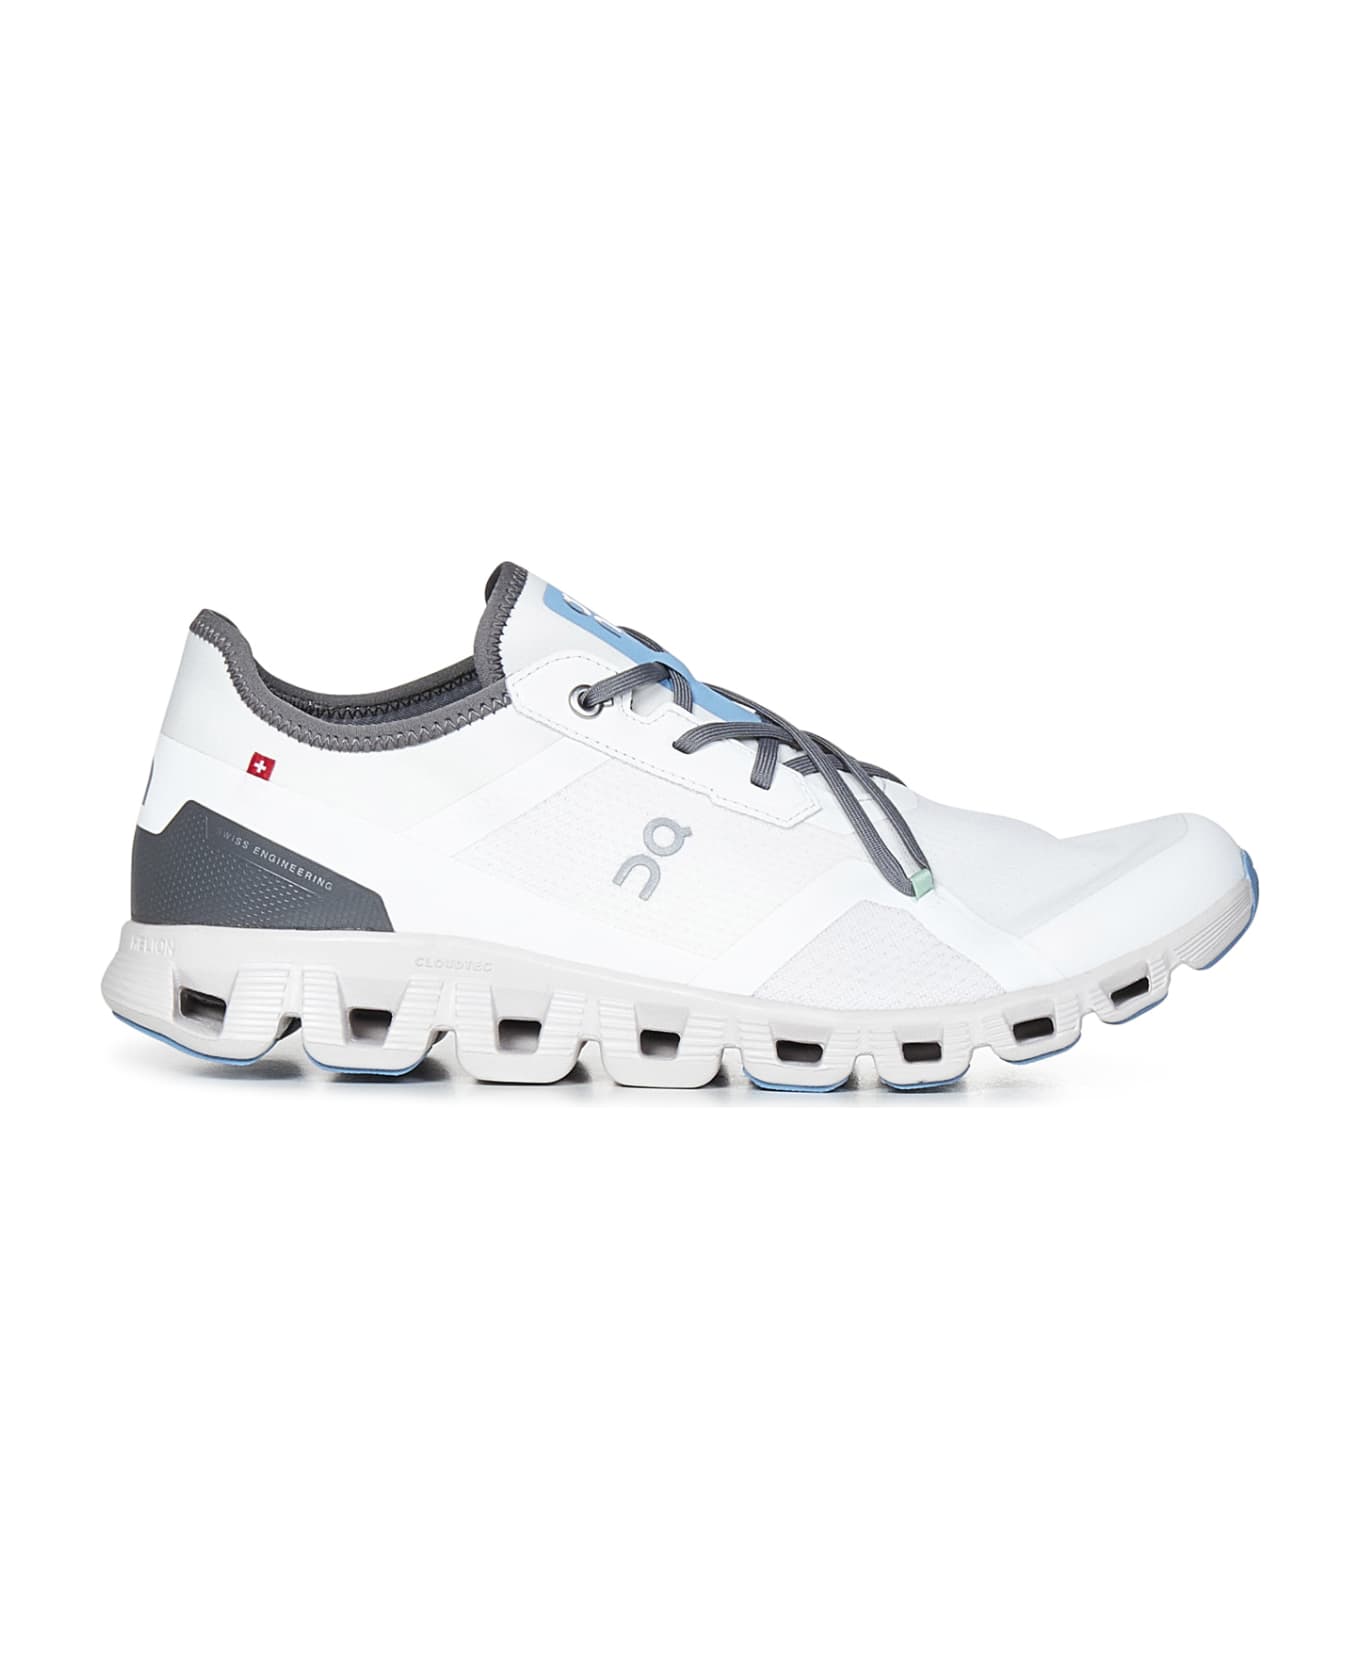 ON Running Cloud X 3 Ad Sneakers - White